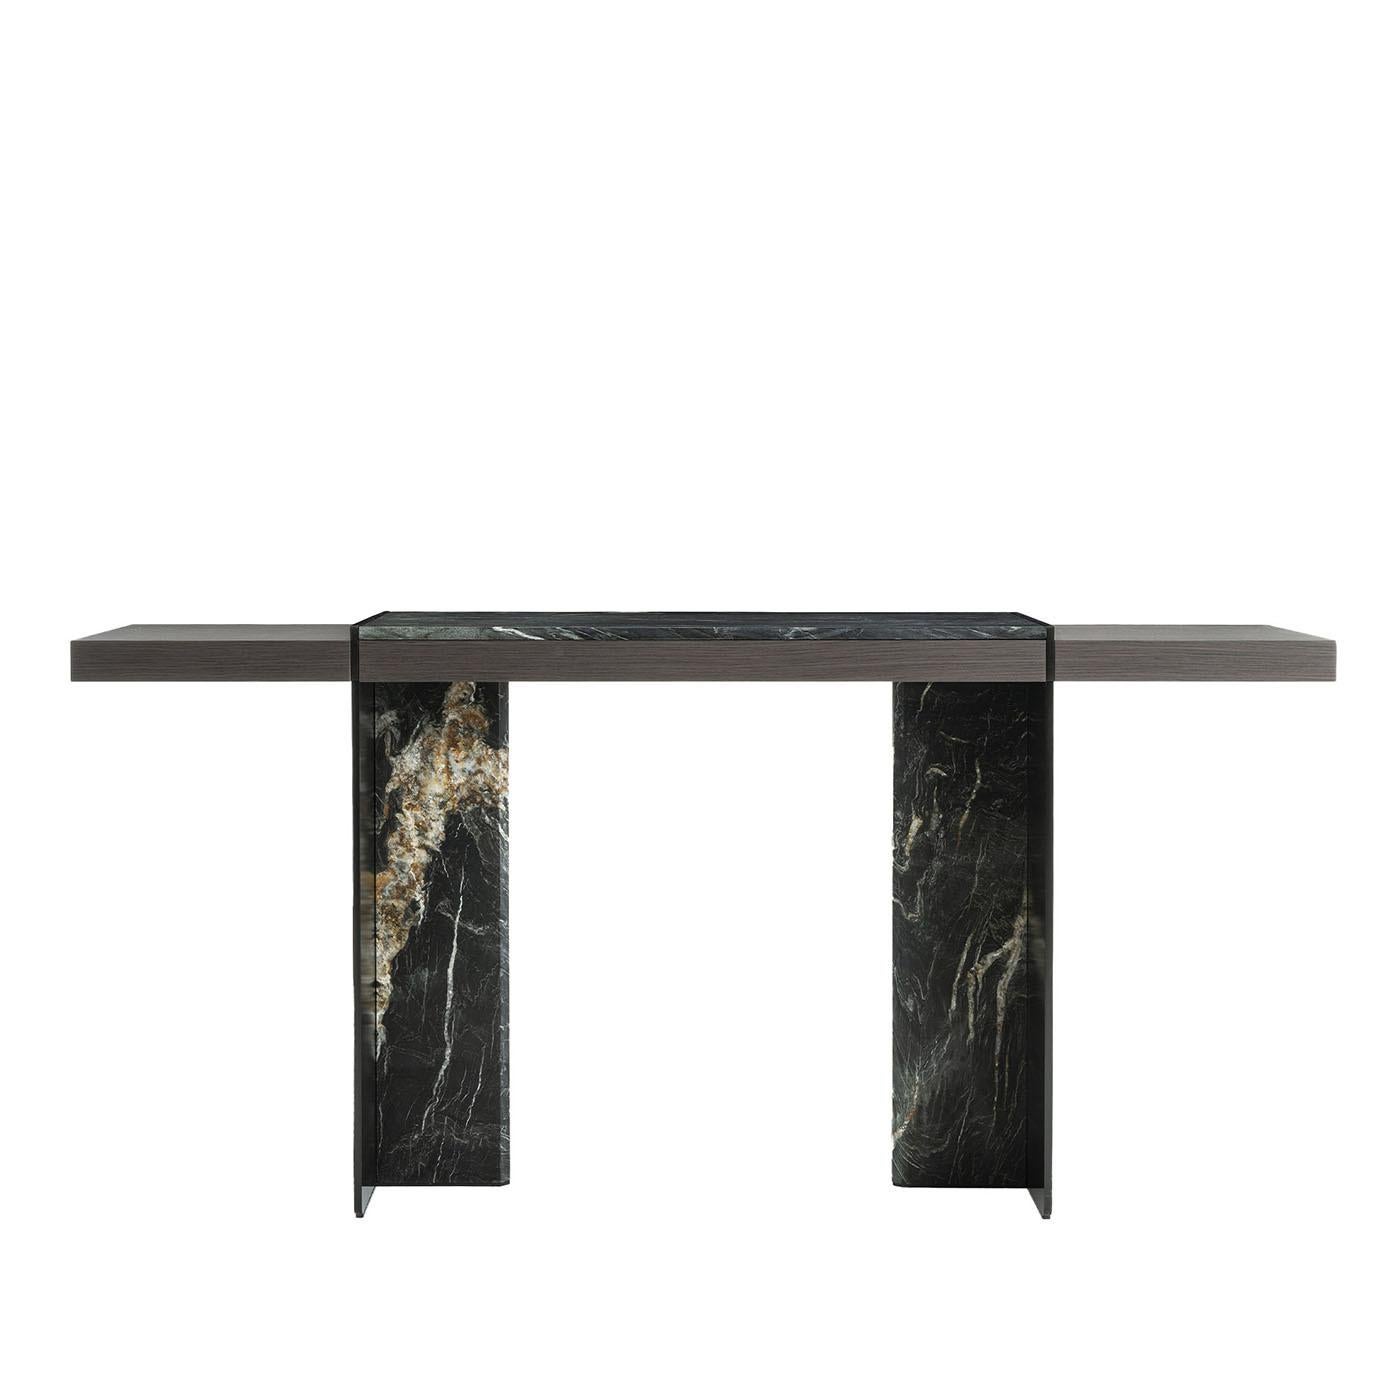 Rigorously intersecting volumes define the sculptural silhouette of this console design, revealing its unique allure through the extensive use of prized Belvedere marble. Black metal details in a sophisticated brushed finish enrich the piece, which